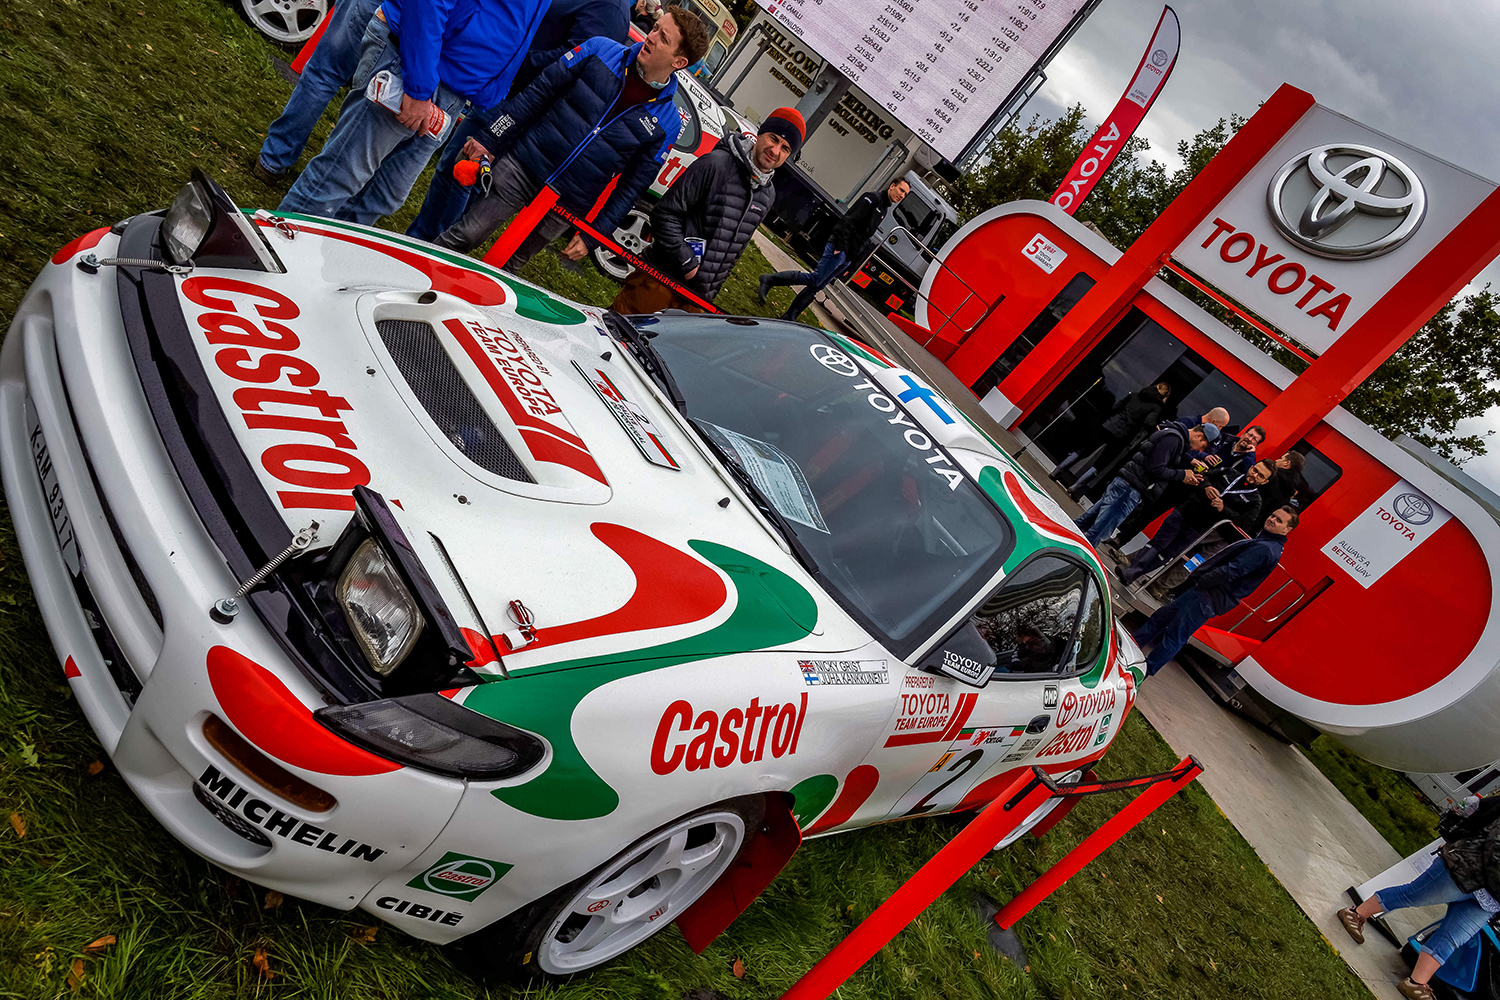 Toyota Gazoo Racing displayed the 1992-94 WRC winning #2 Juha Kankkunen and co-driver Nicky Grist Celica GT-Four at the Cholmondeley Castle stage of the Rally GB 